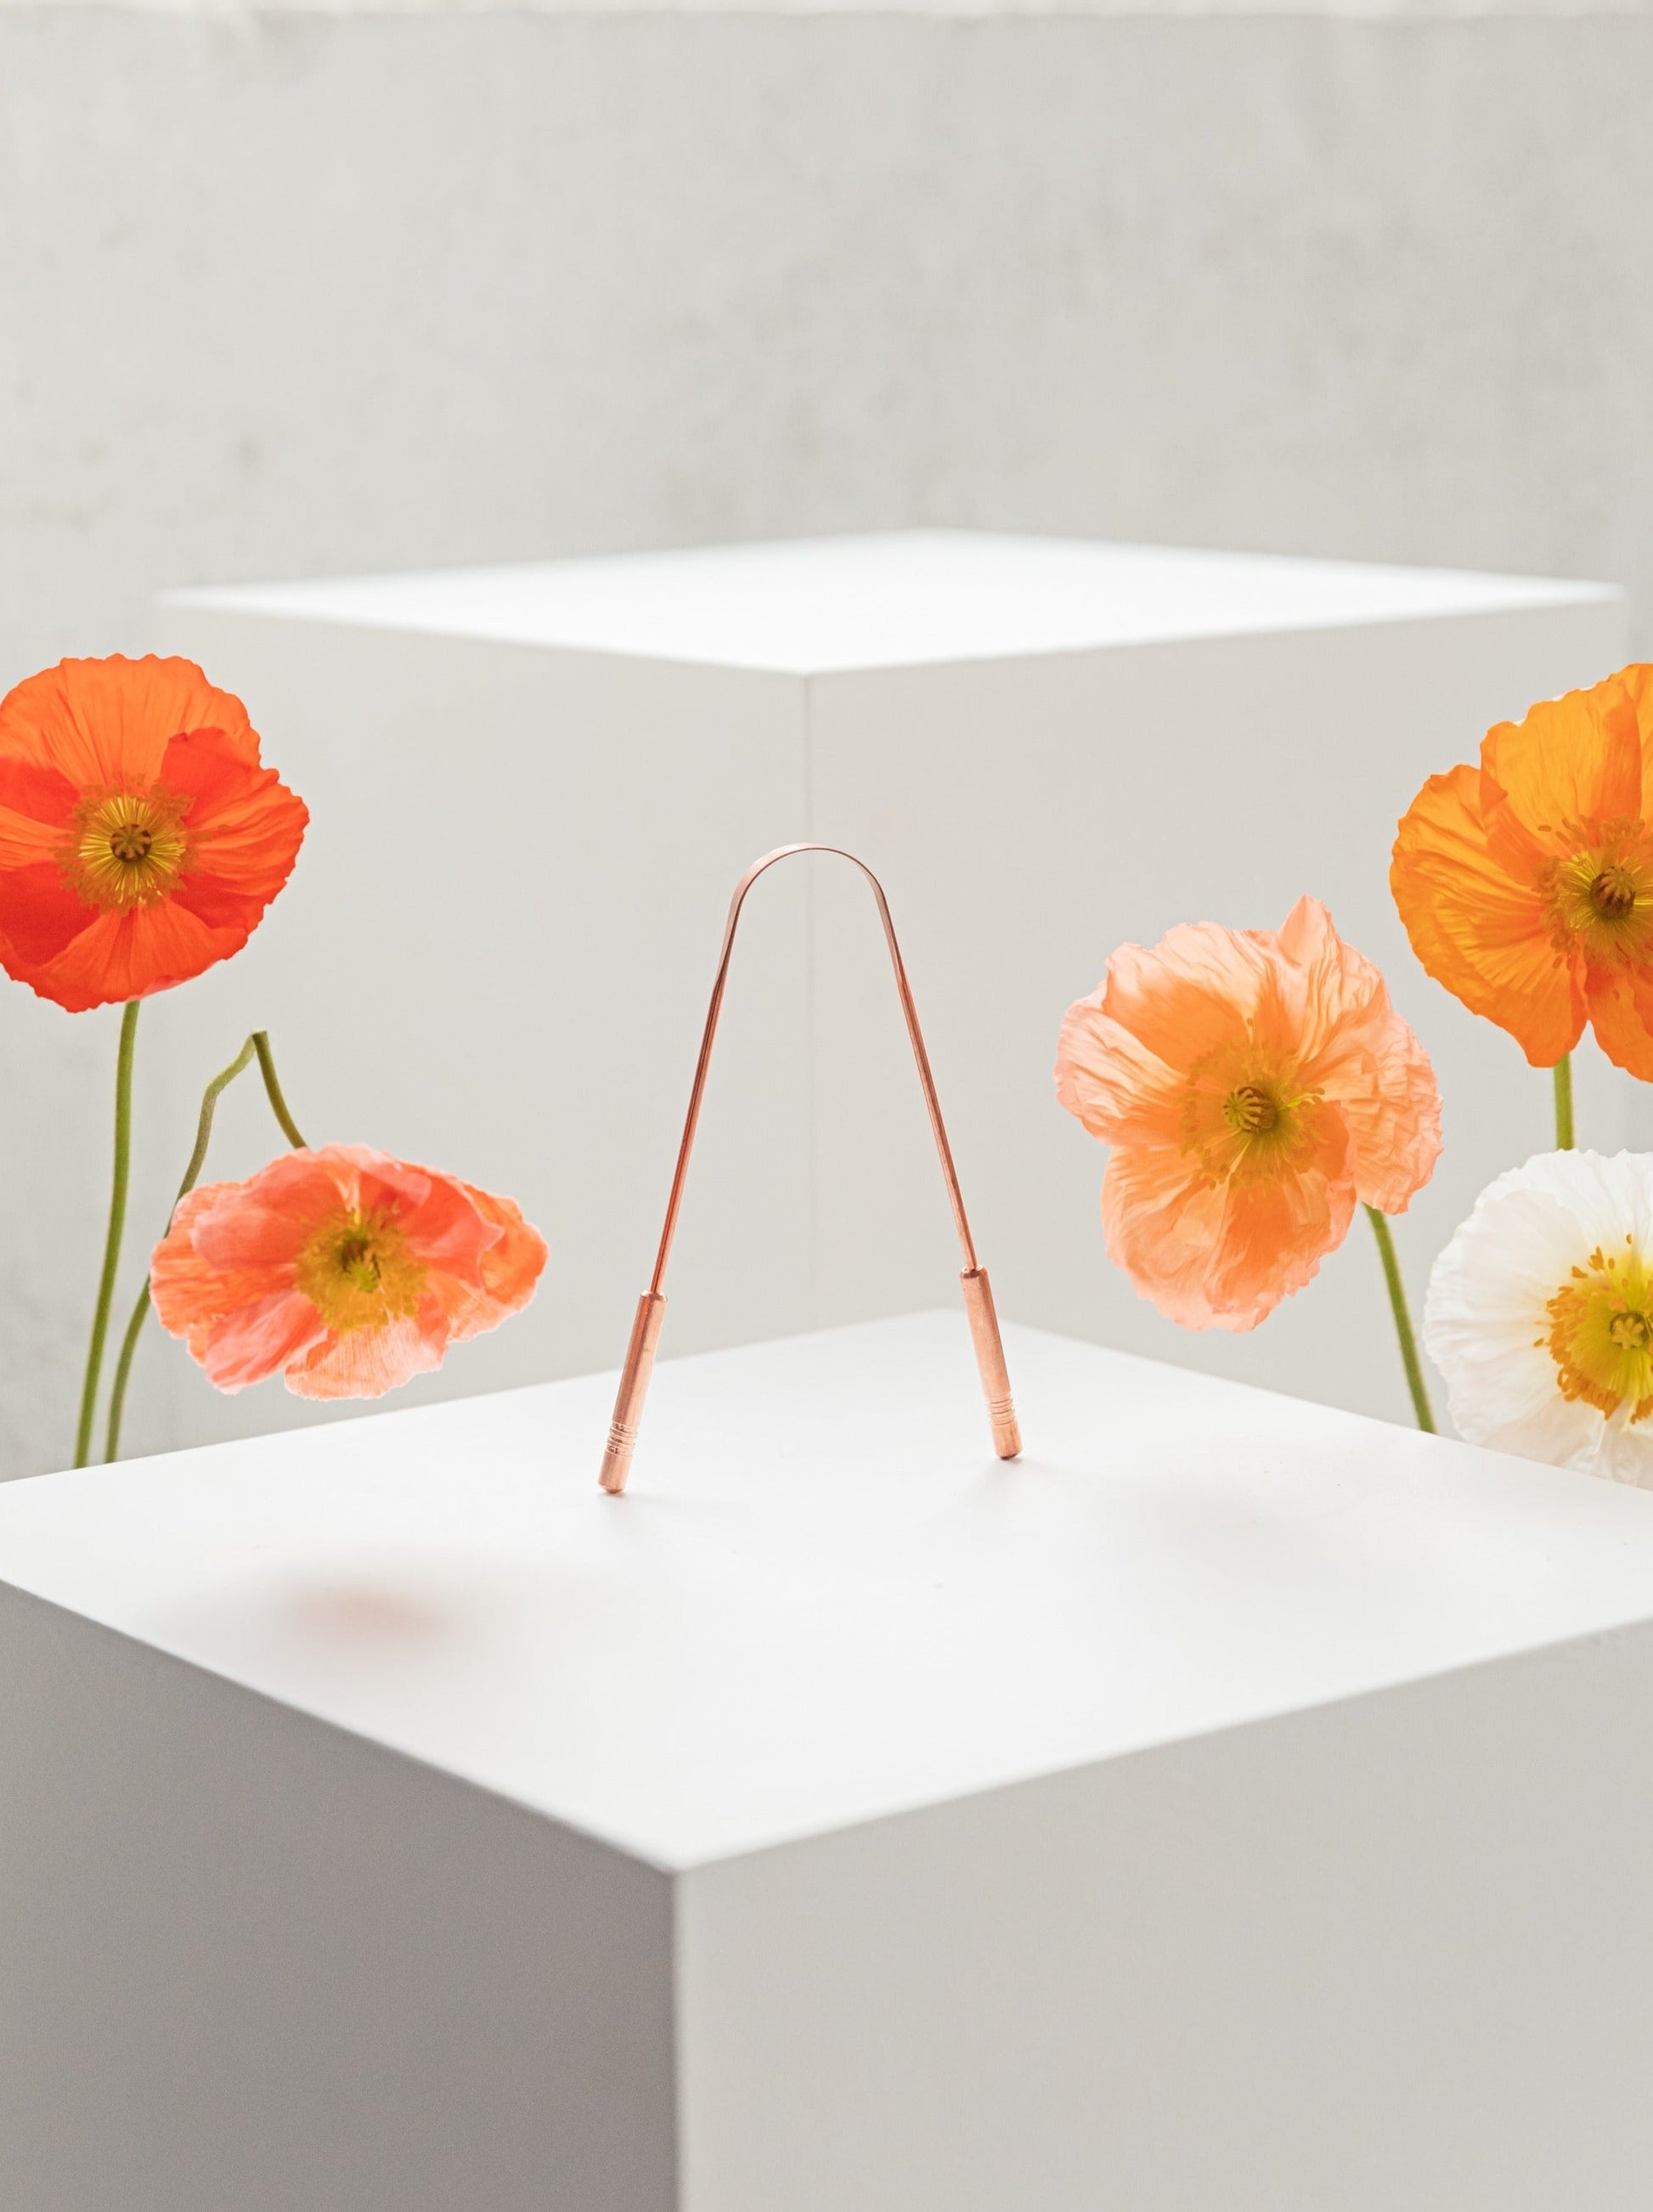 Copper tongue cleaner balancing on a white plinth with fresh poppies either side